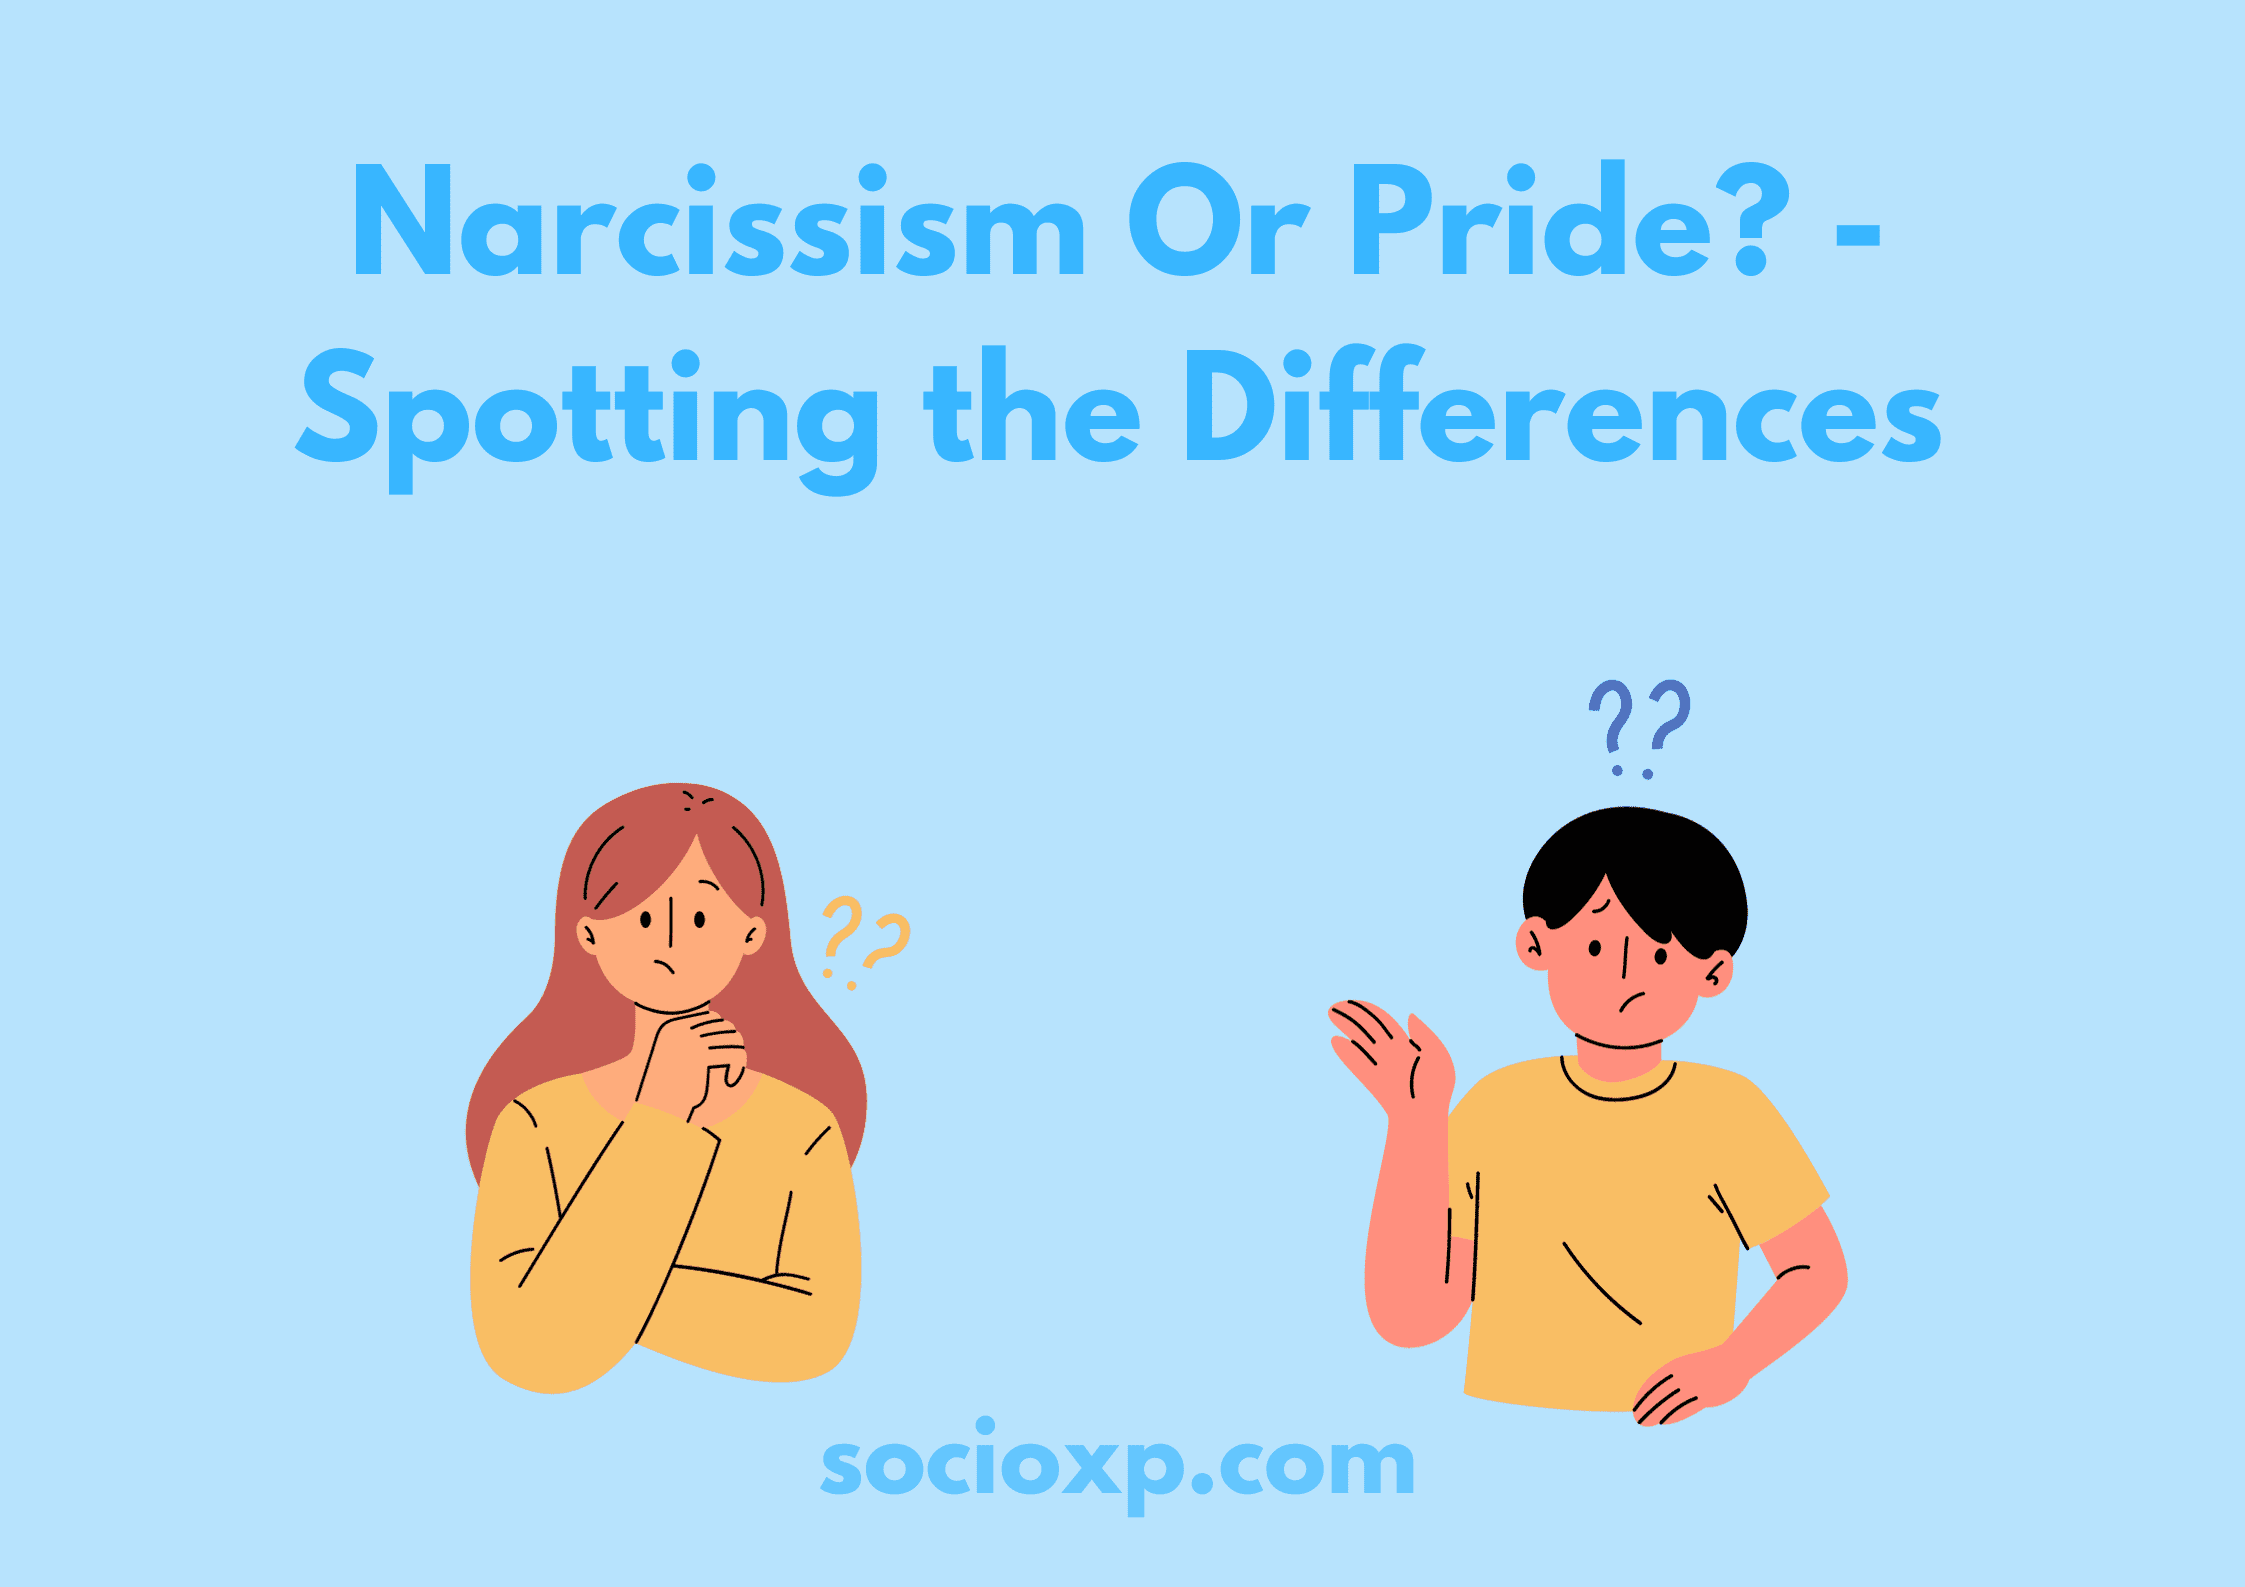 Narcissism Or Pride? - Spotting the Differences